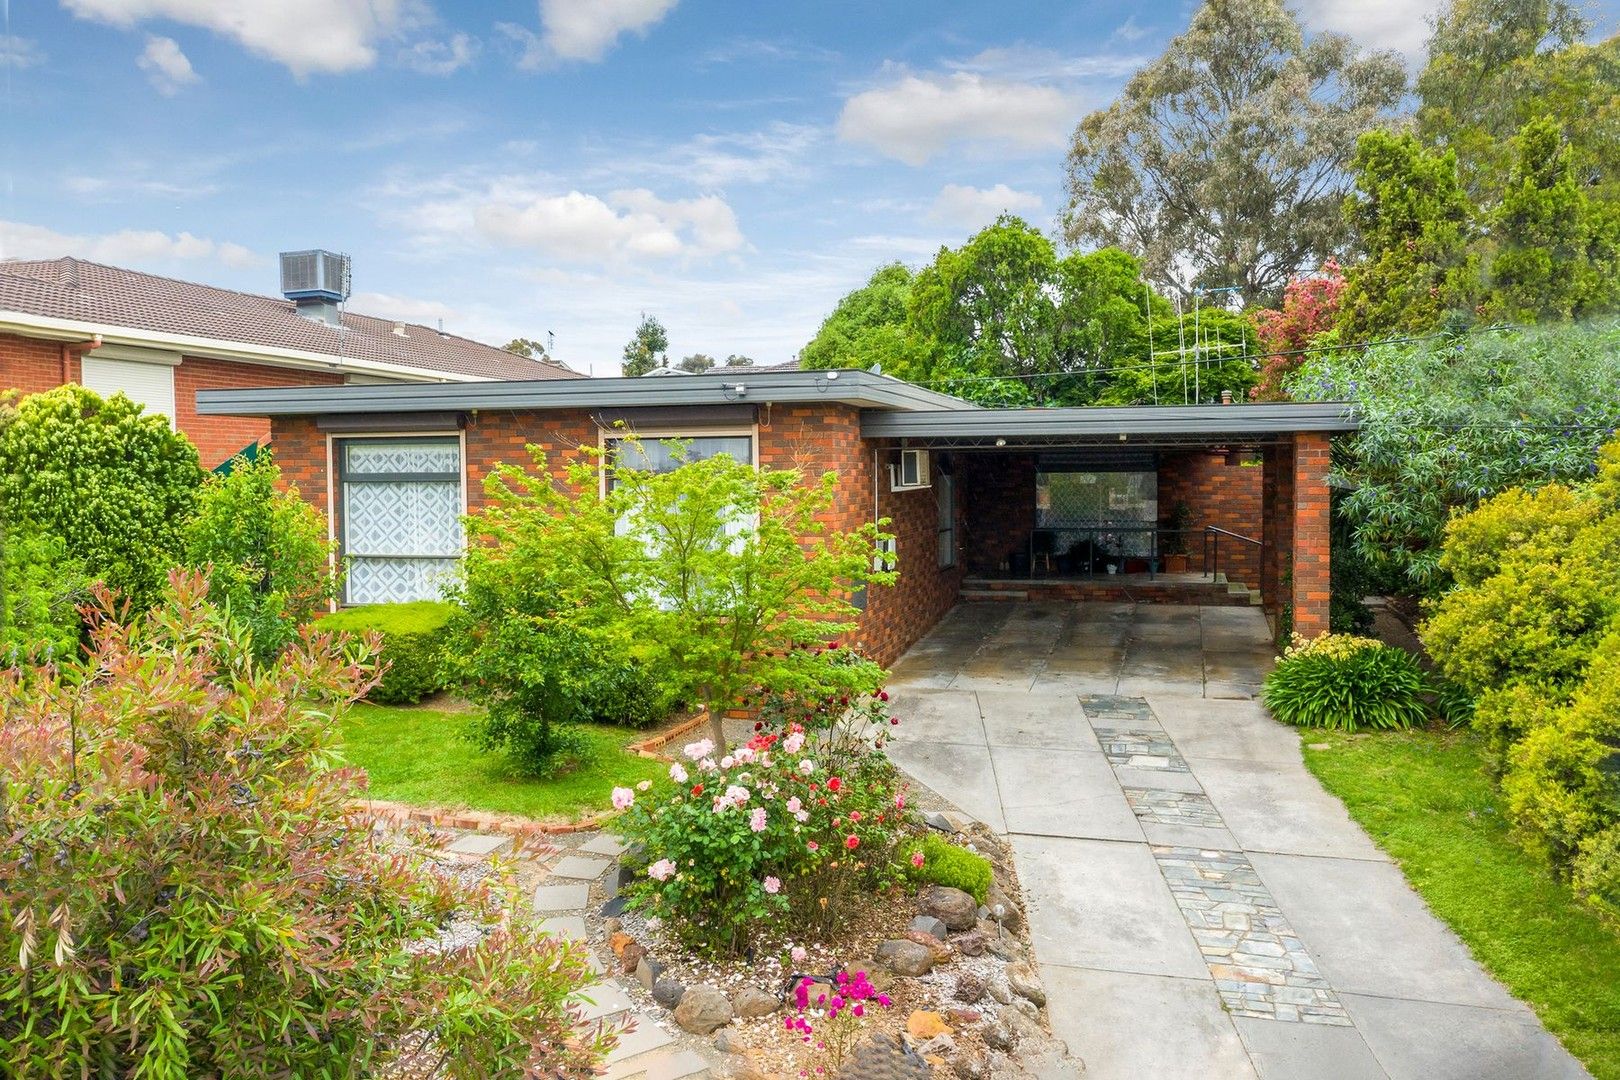 3 bedrooms House in 11 Rosemary Avenue STRATHDALE VIC, 3550